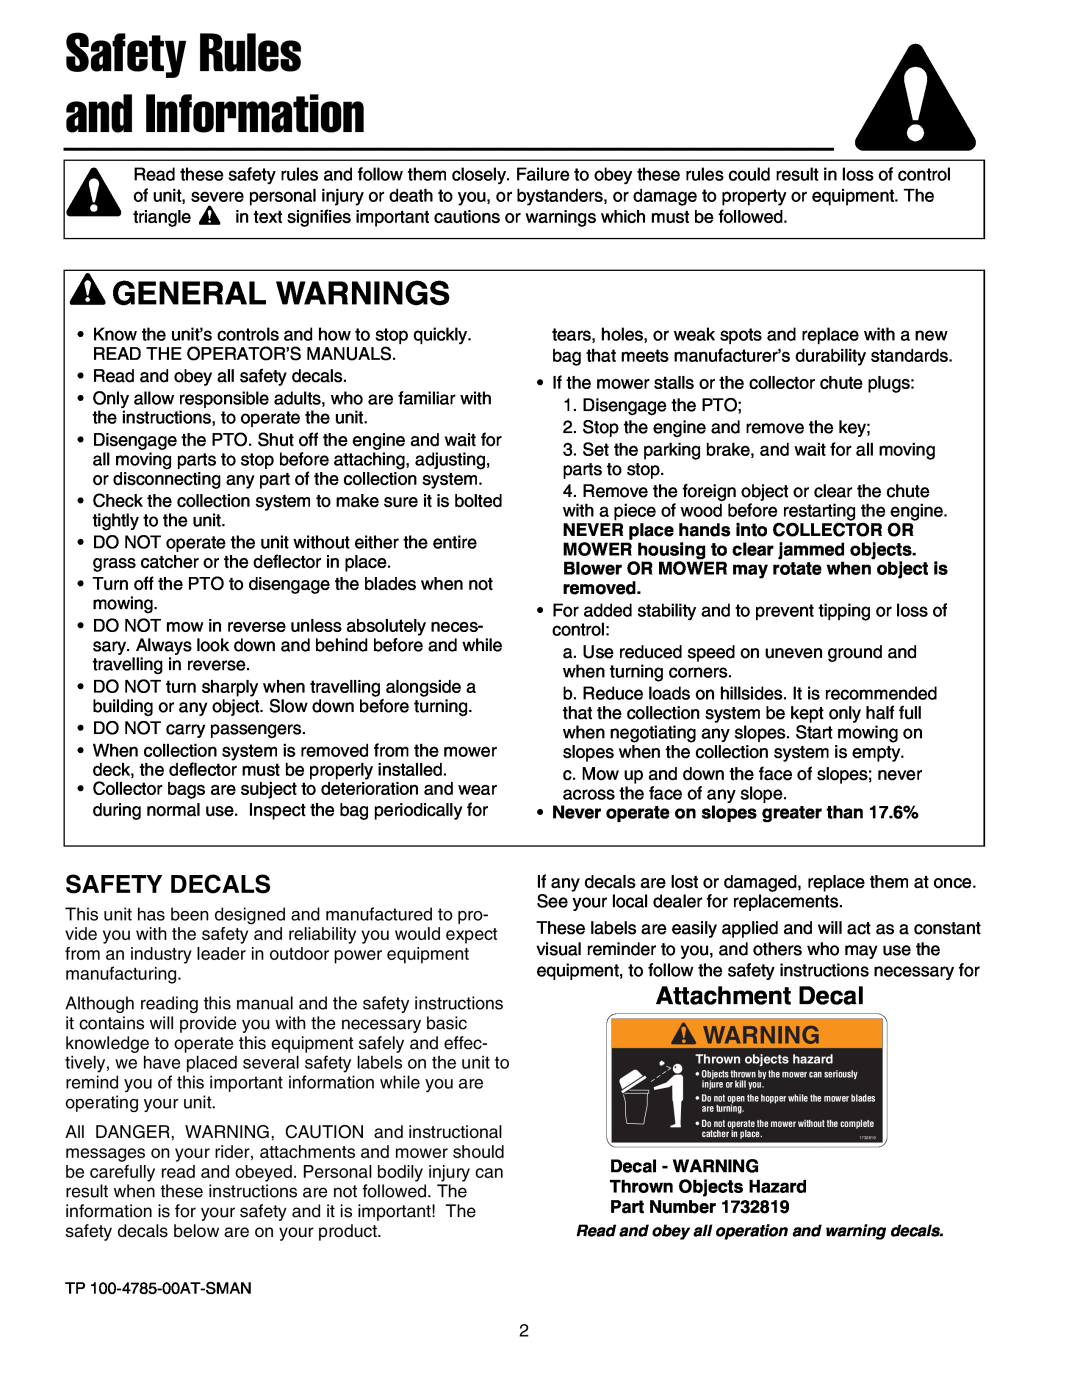 Briggs & Stratton 5900703 manual Safety Decals, Attachment Decal, Safety Rules and Information, General Warnings 